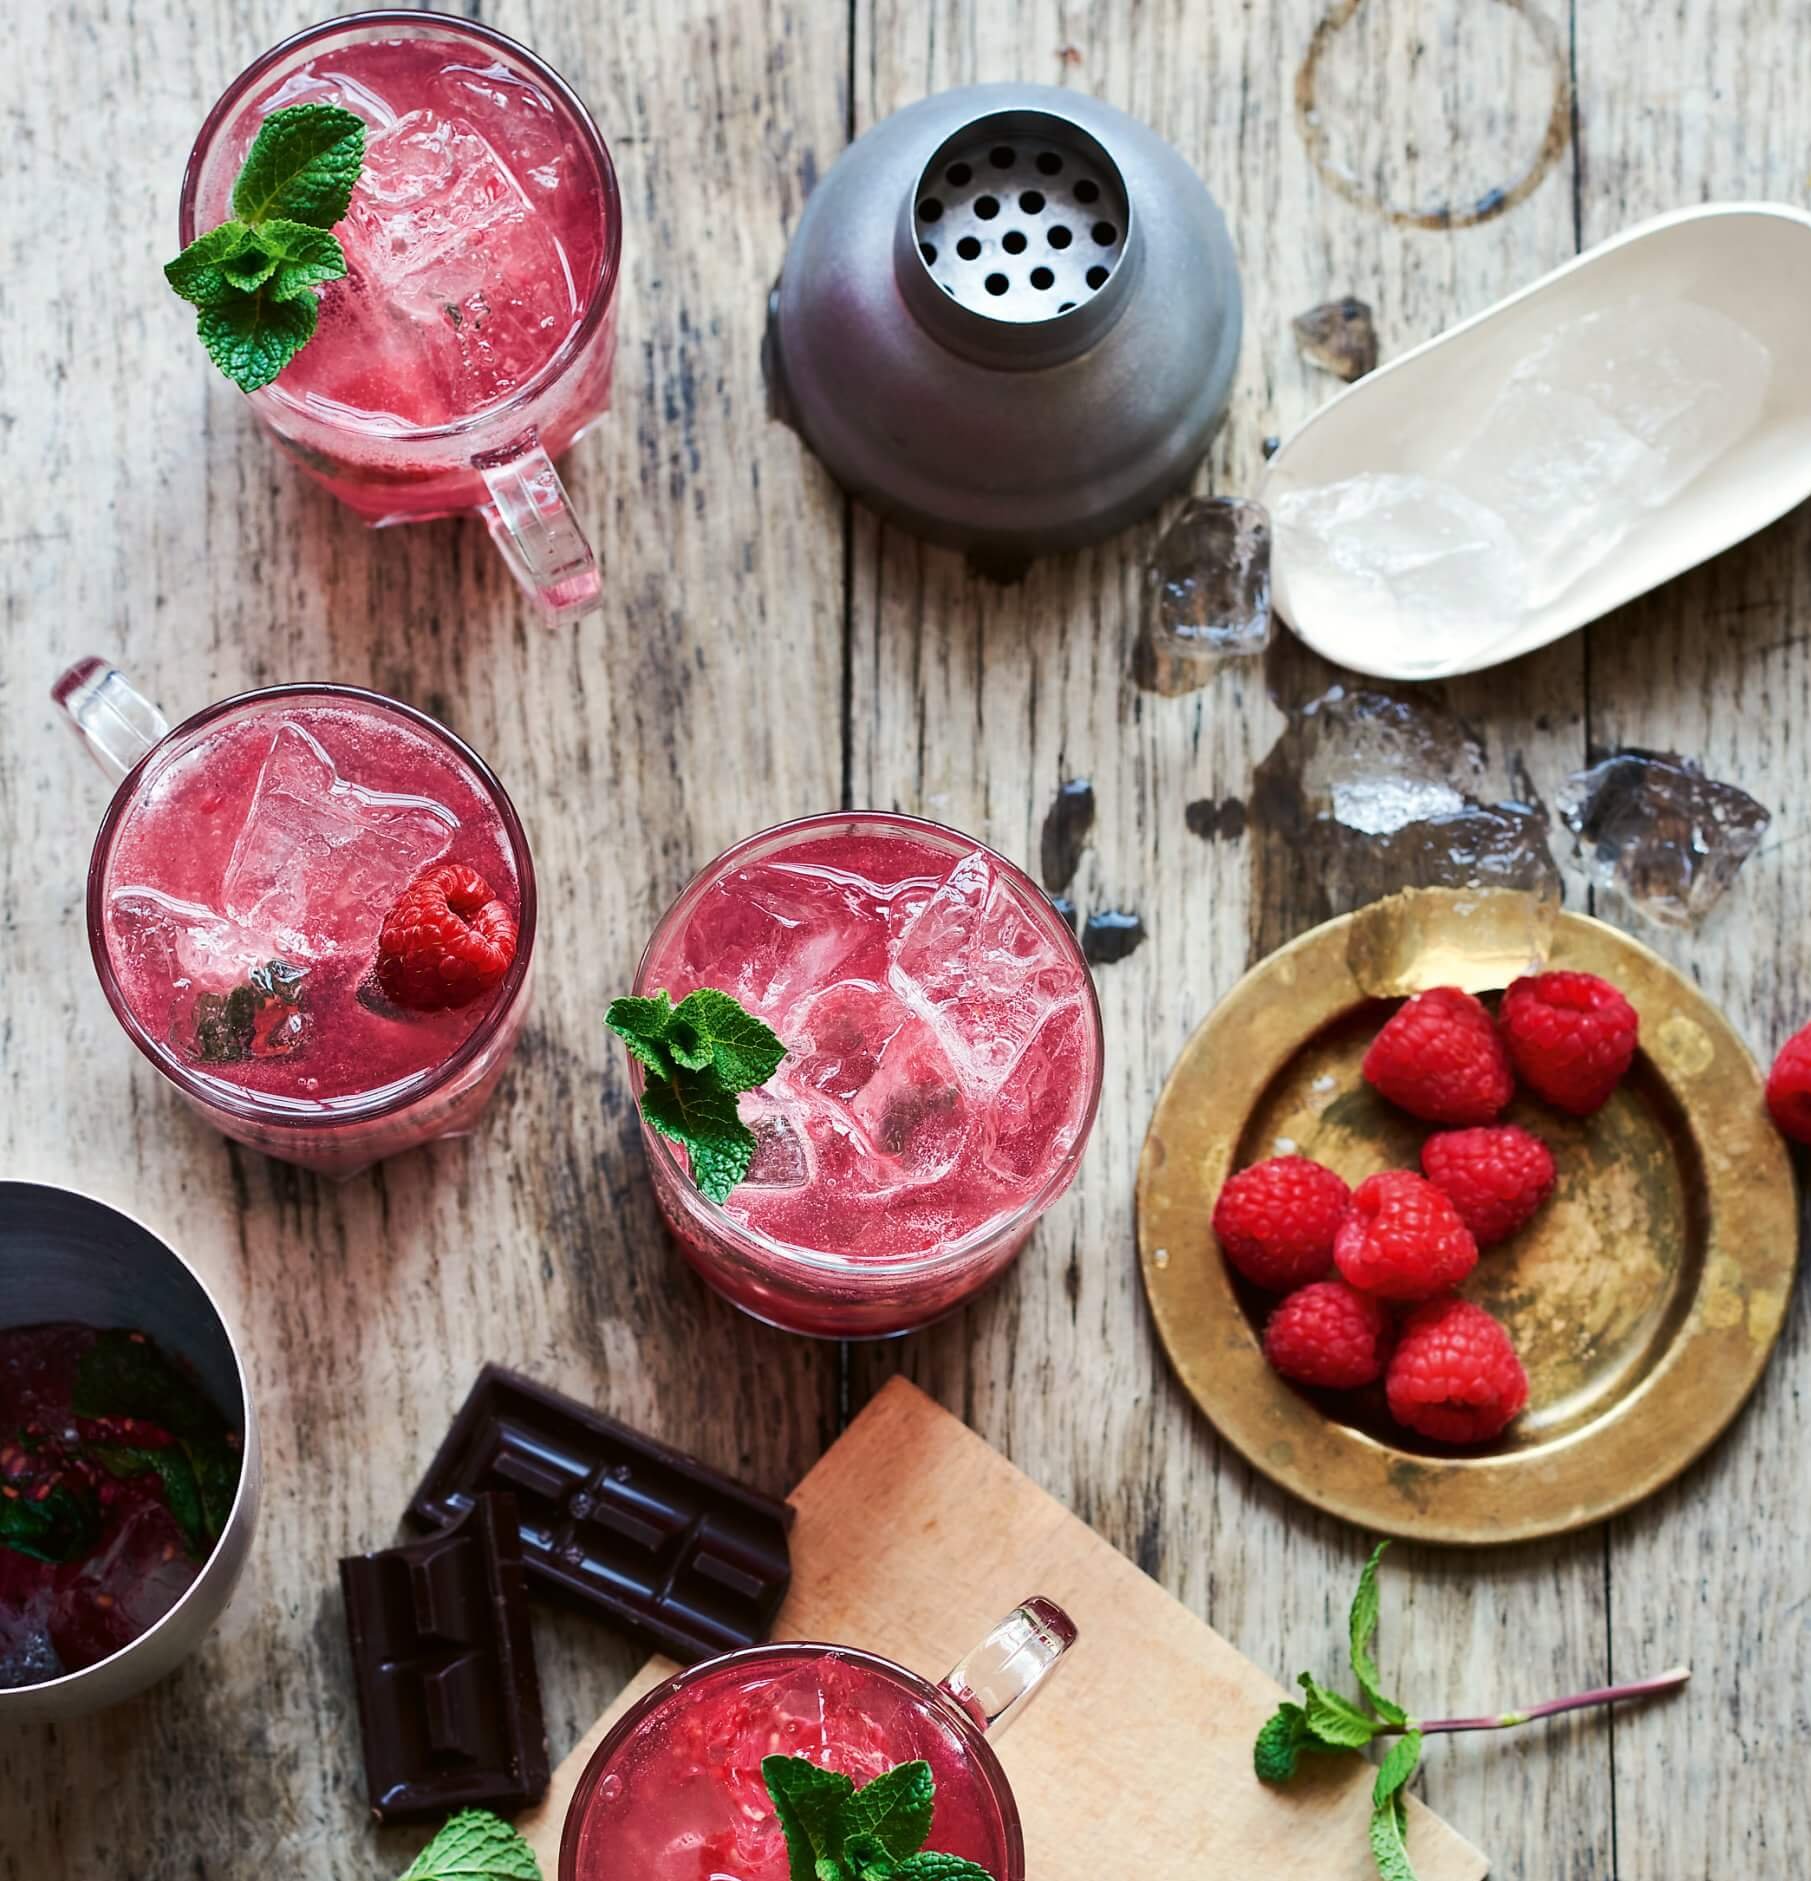 Glasses filled with a red cocktail and raspberries on a grey wooden surface